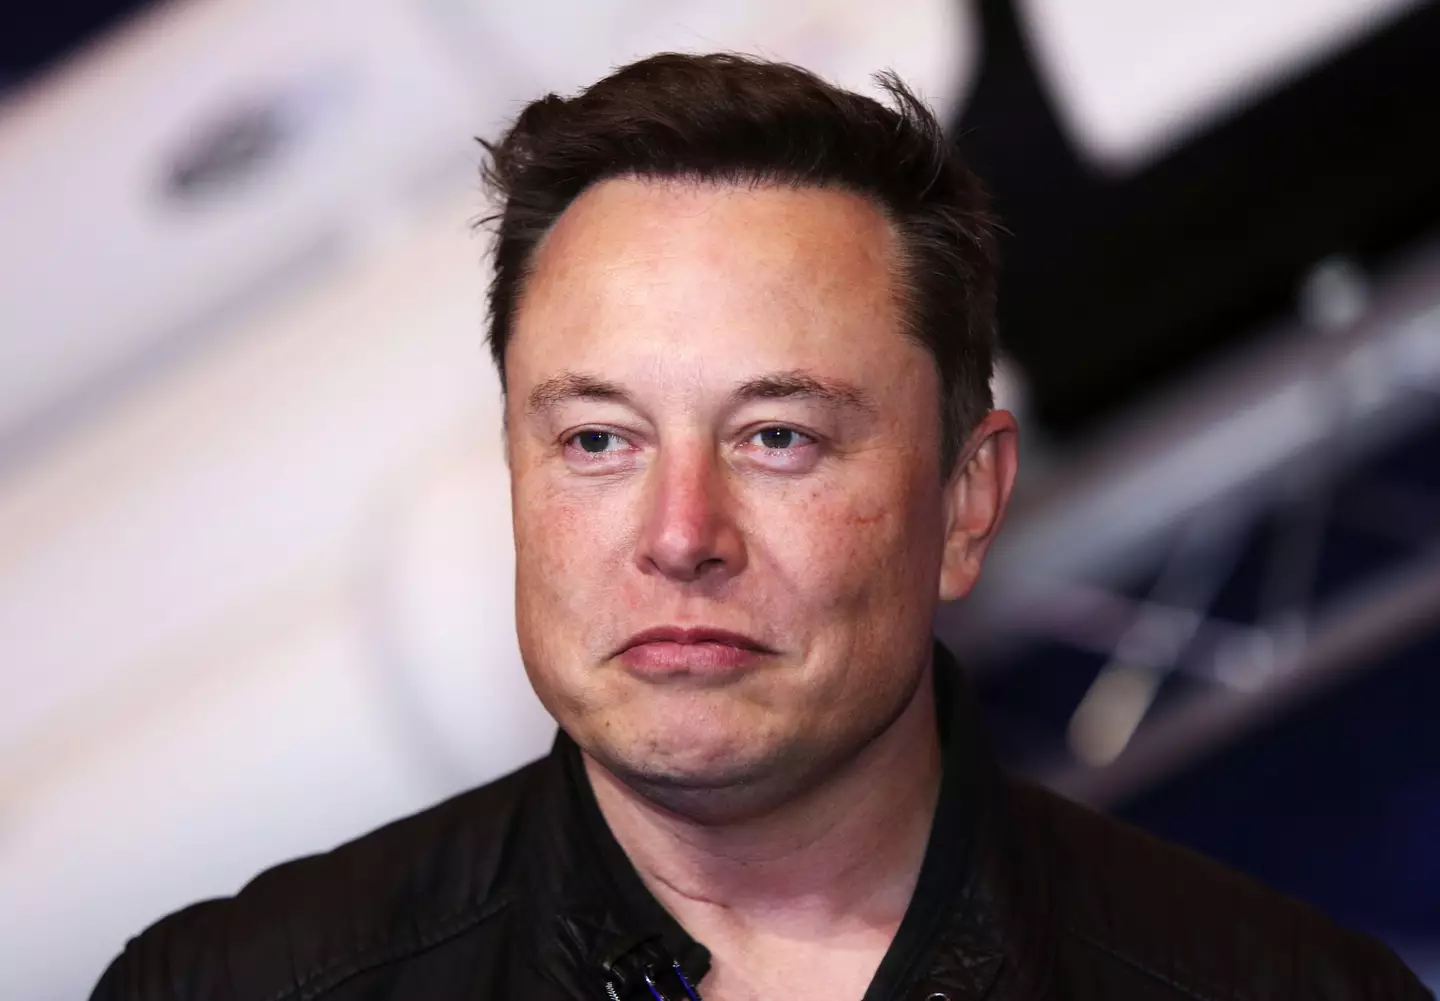 The odd details of Elon Musk's deal with Twitter have emerged.